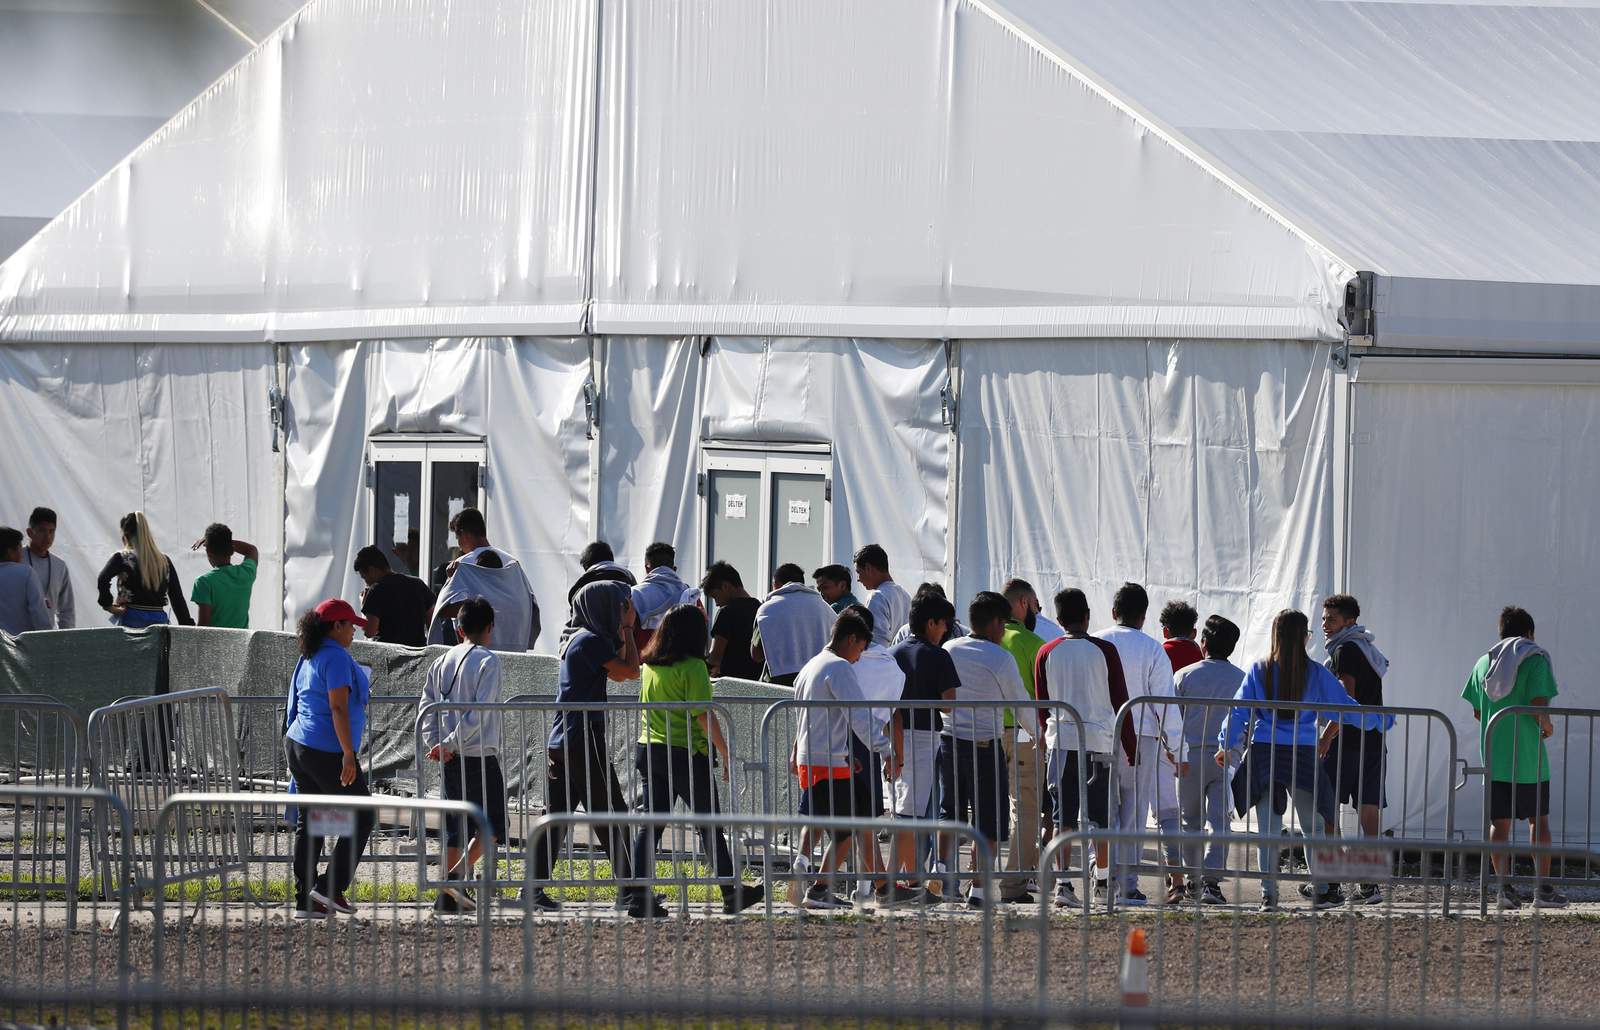 Parents of 545 children separated at border can't be found